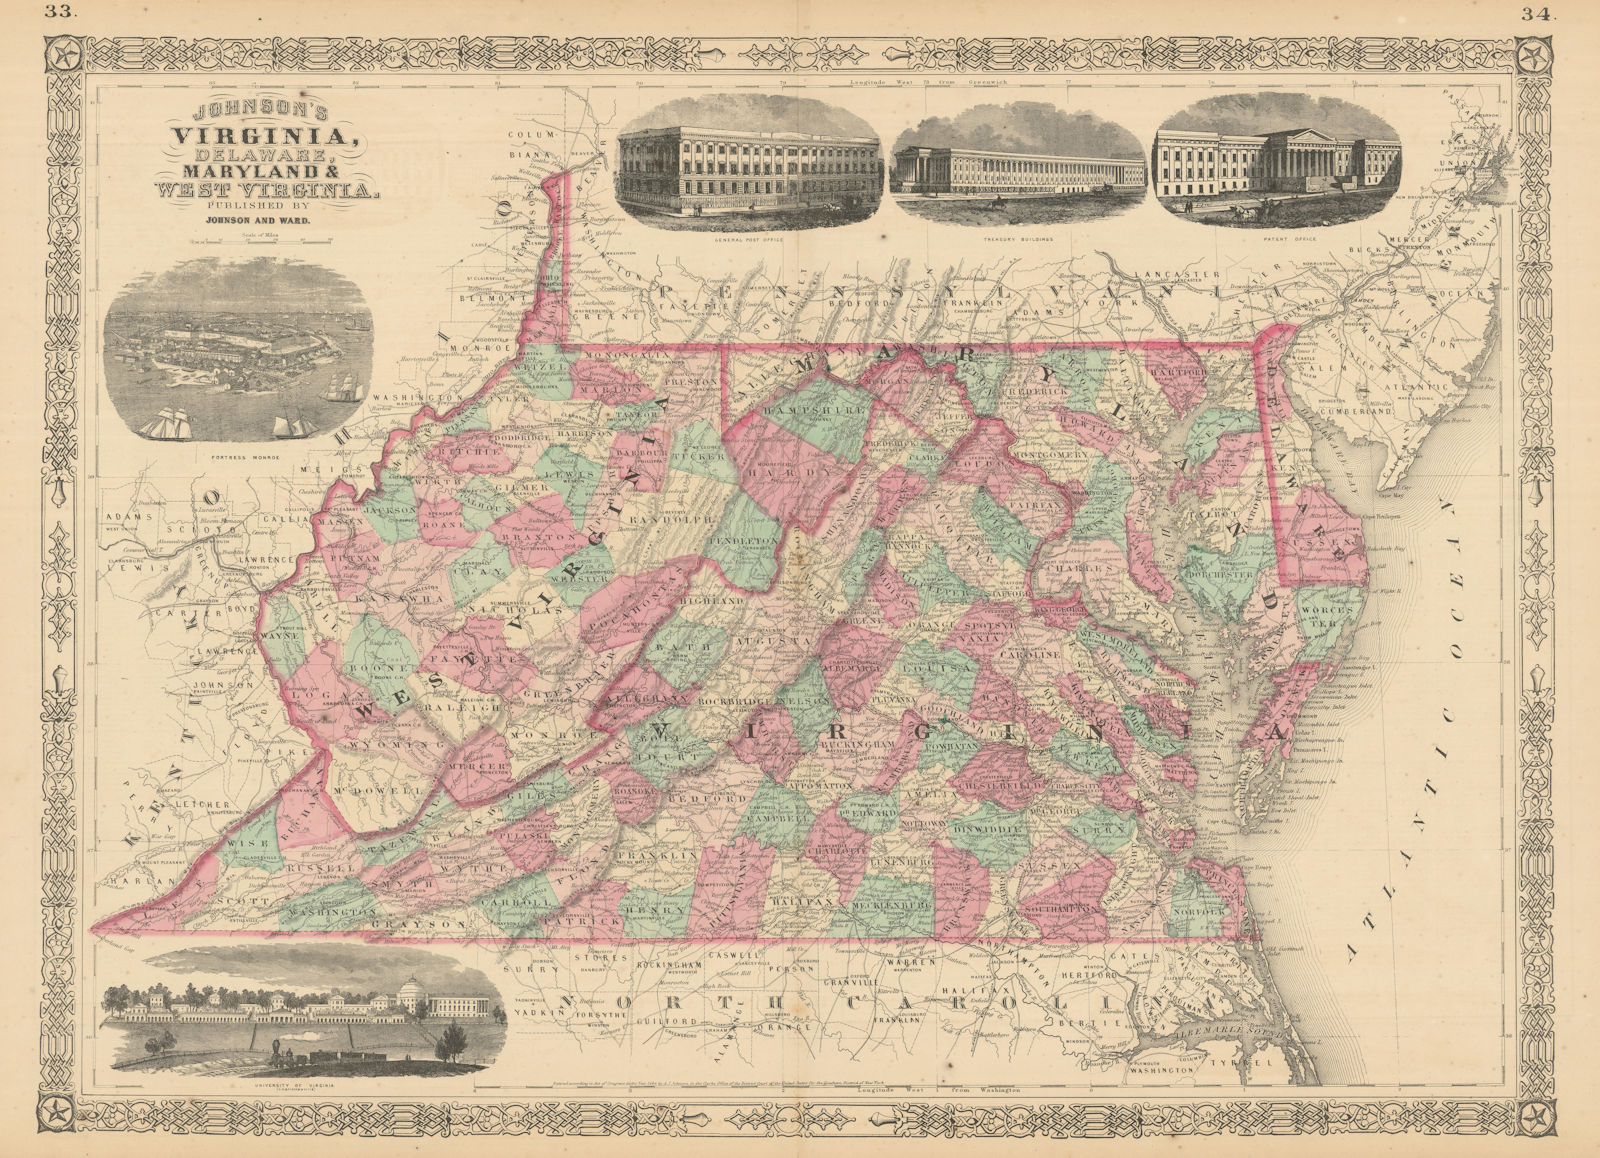 Associate Product Johnson's Virginia, Delaware, Maryland & West Virginia. Counties 1866 old map